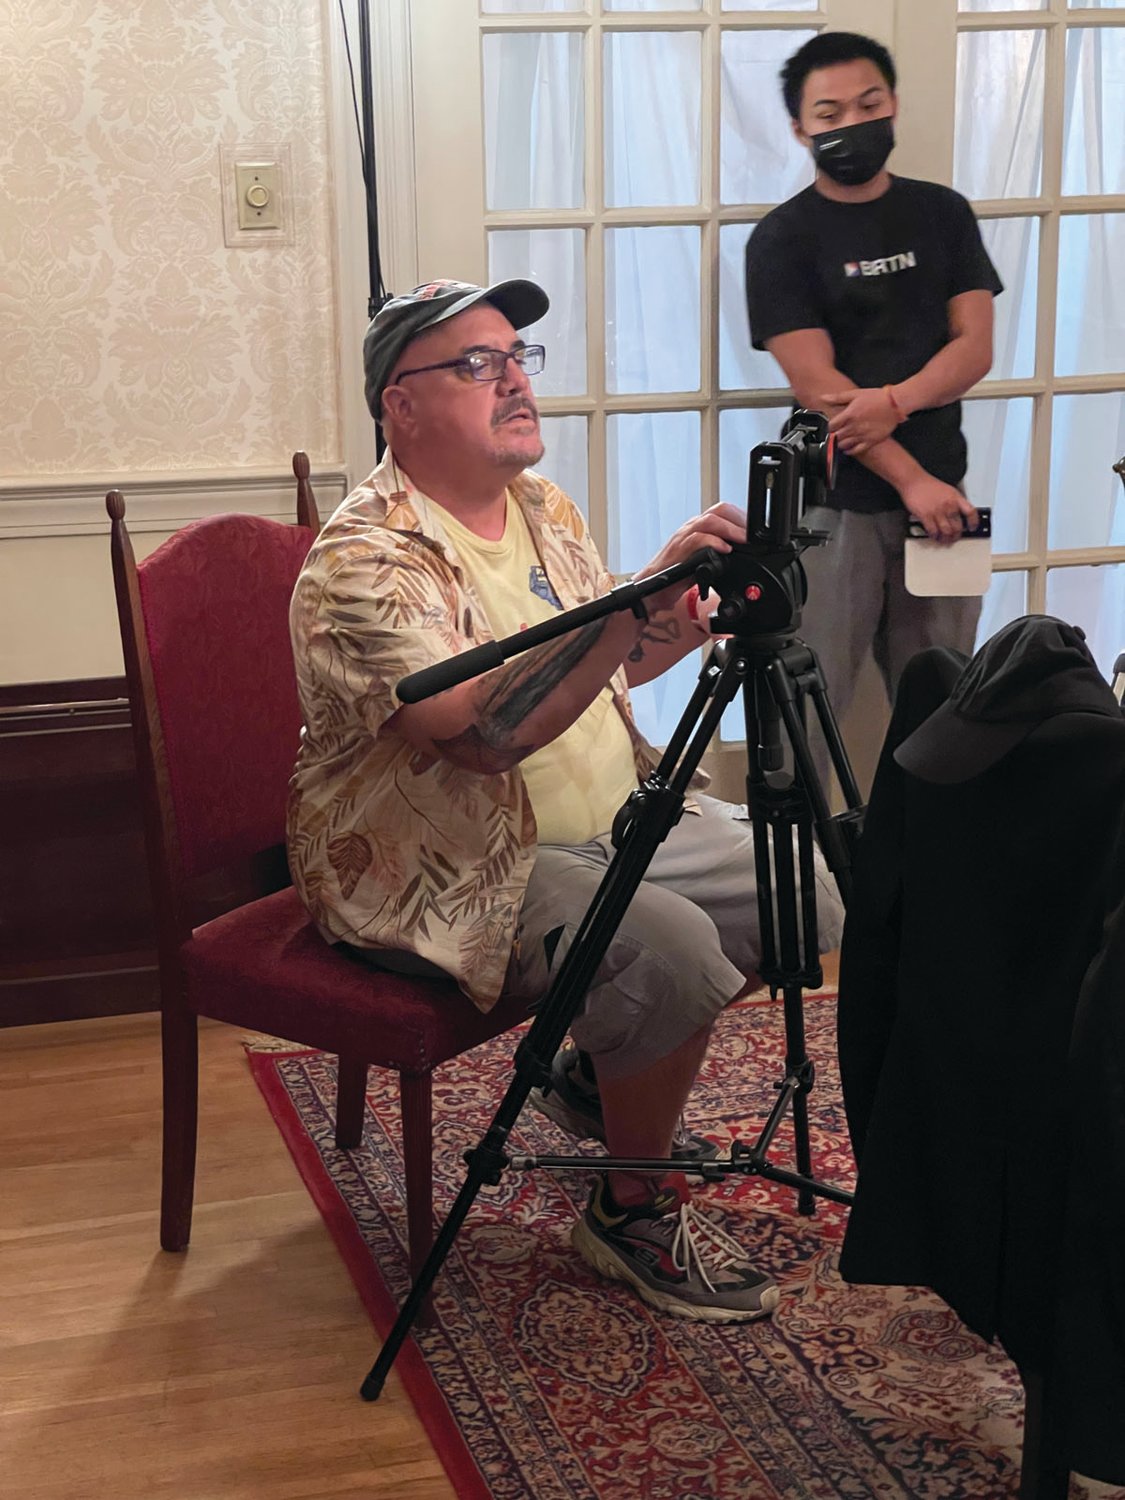 BEHIND THE LENS: Sean Michael Beyer, director of “Poor Paul,” prepares for a shoot in the dining room at Sprague Mansion on Friday.